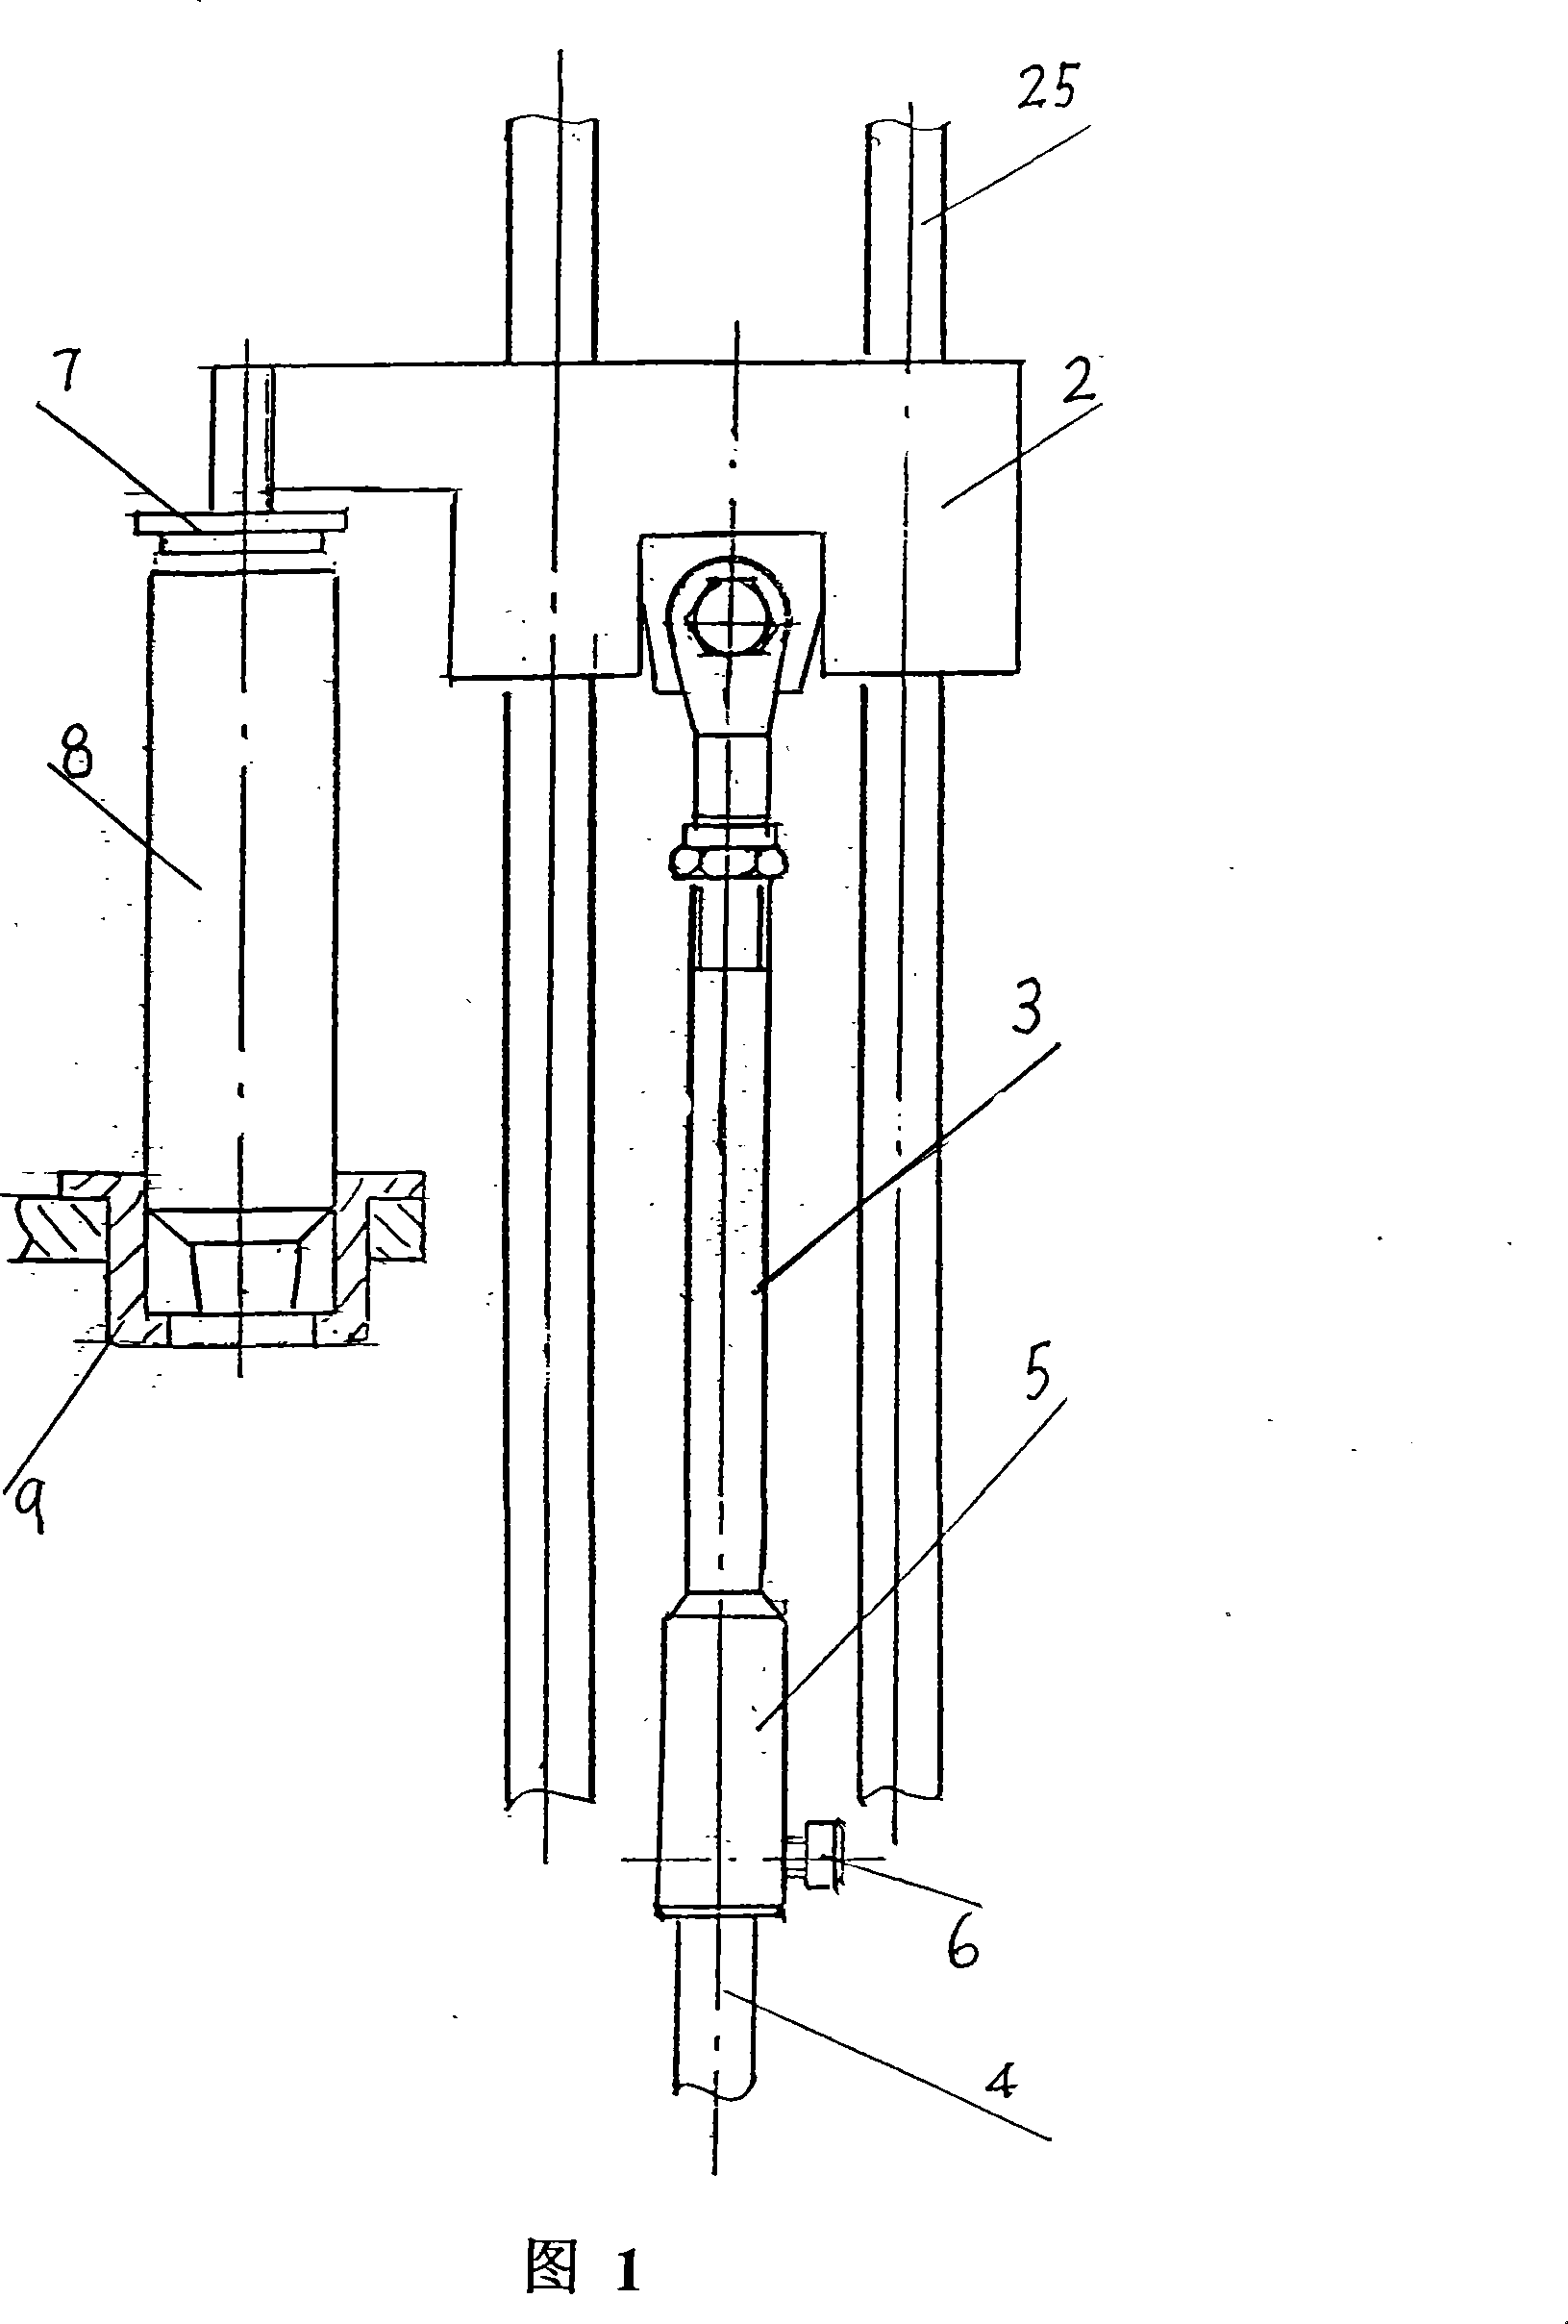 Apparatus for automatically regulating bi-slider position of packing machine